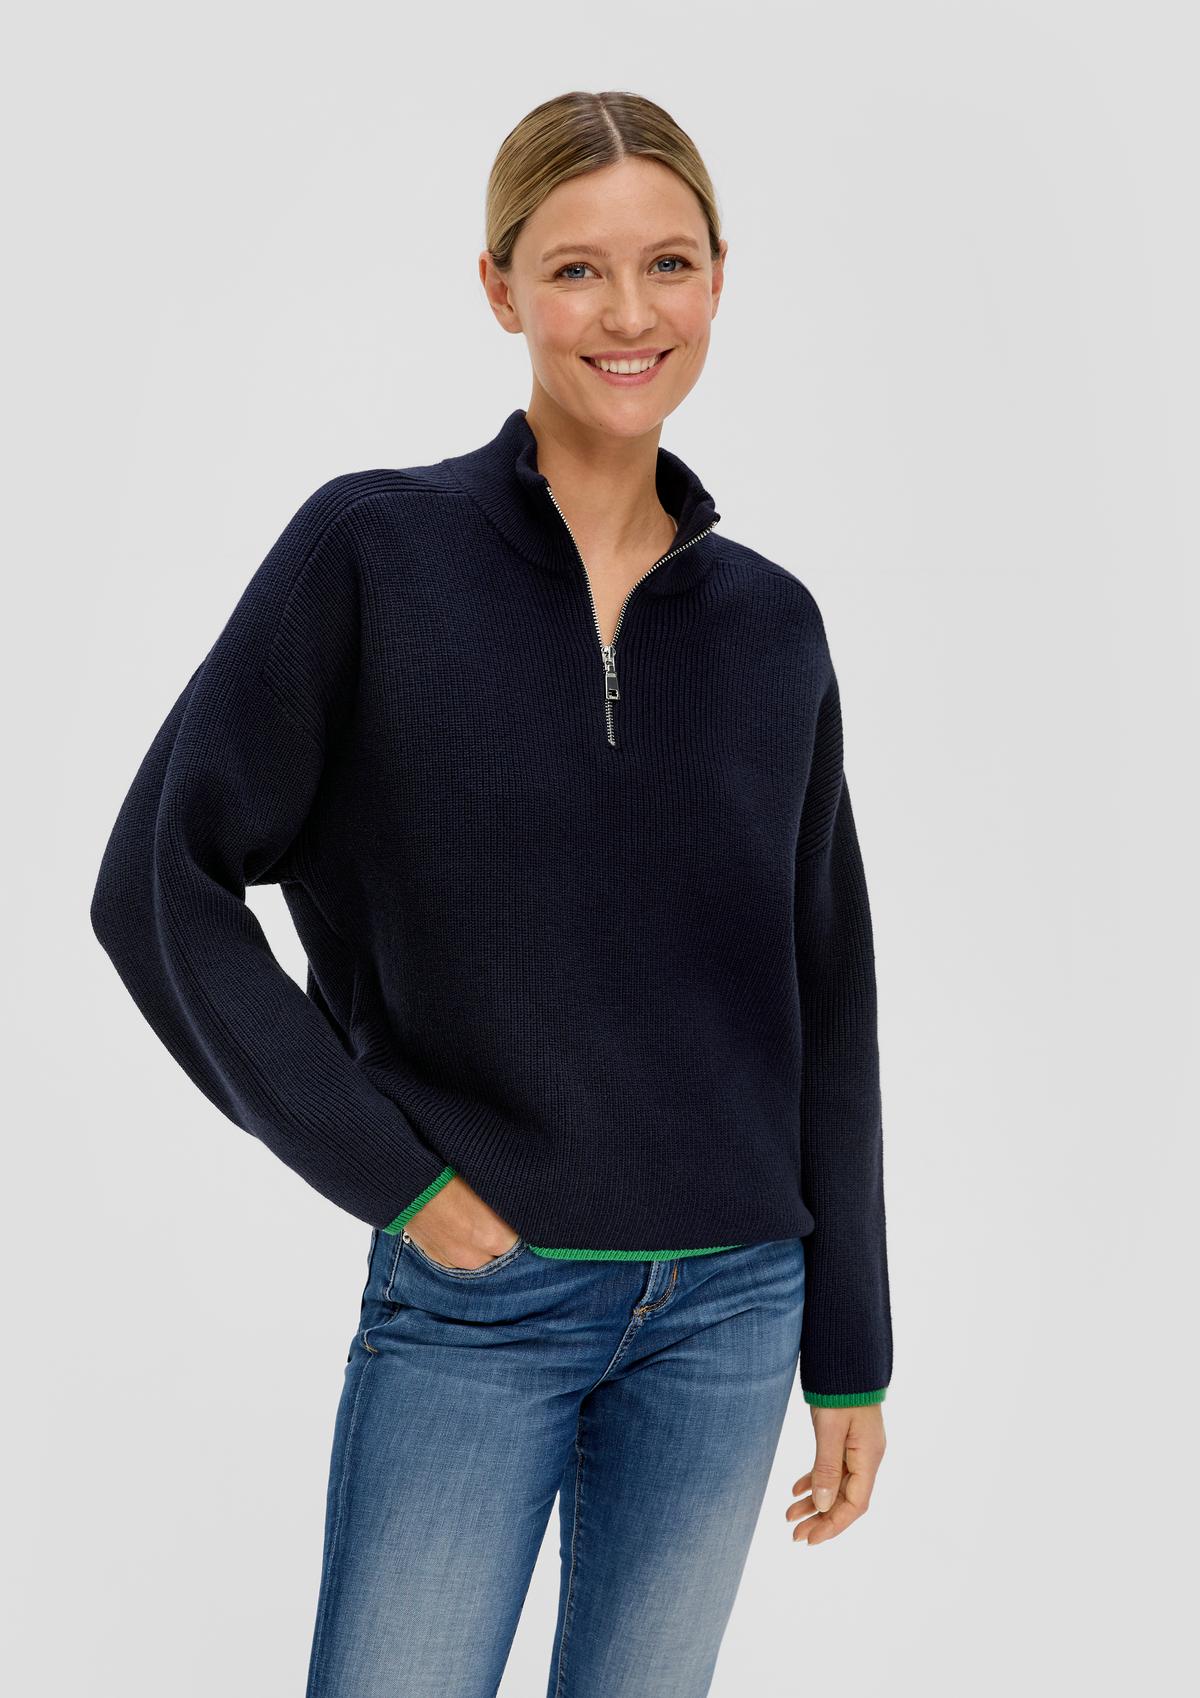 s.Oliver Jumper with a button/zip neck